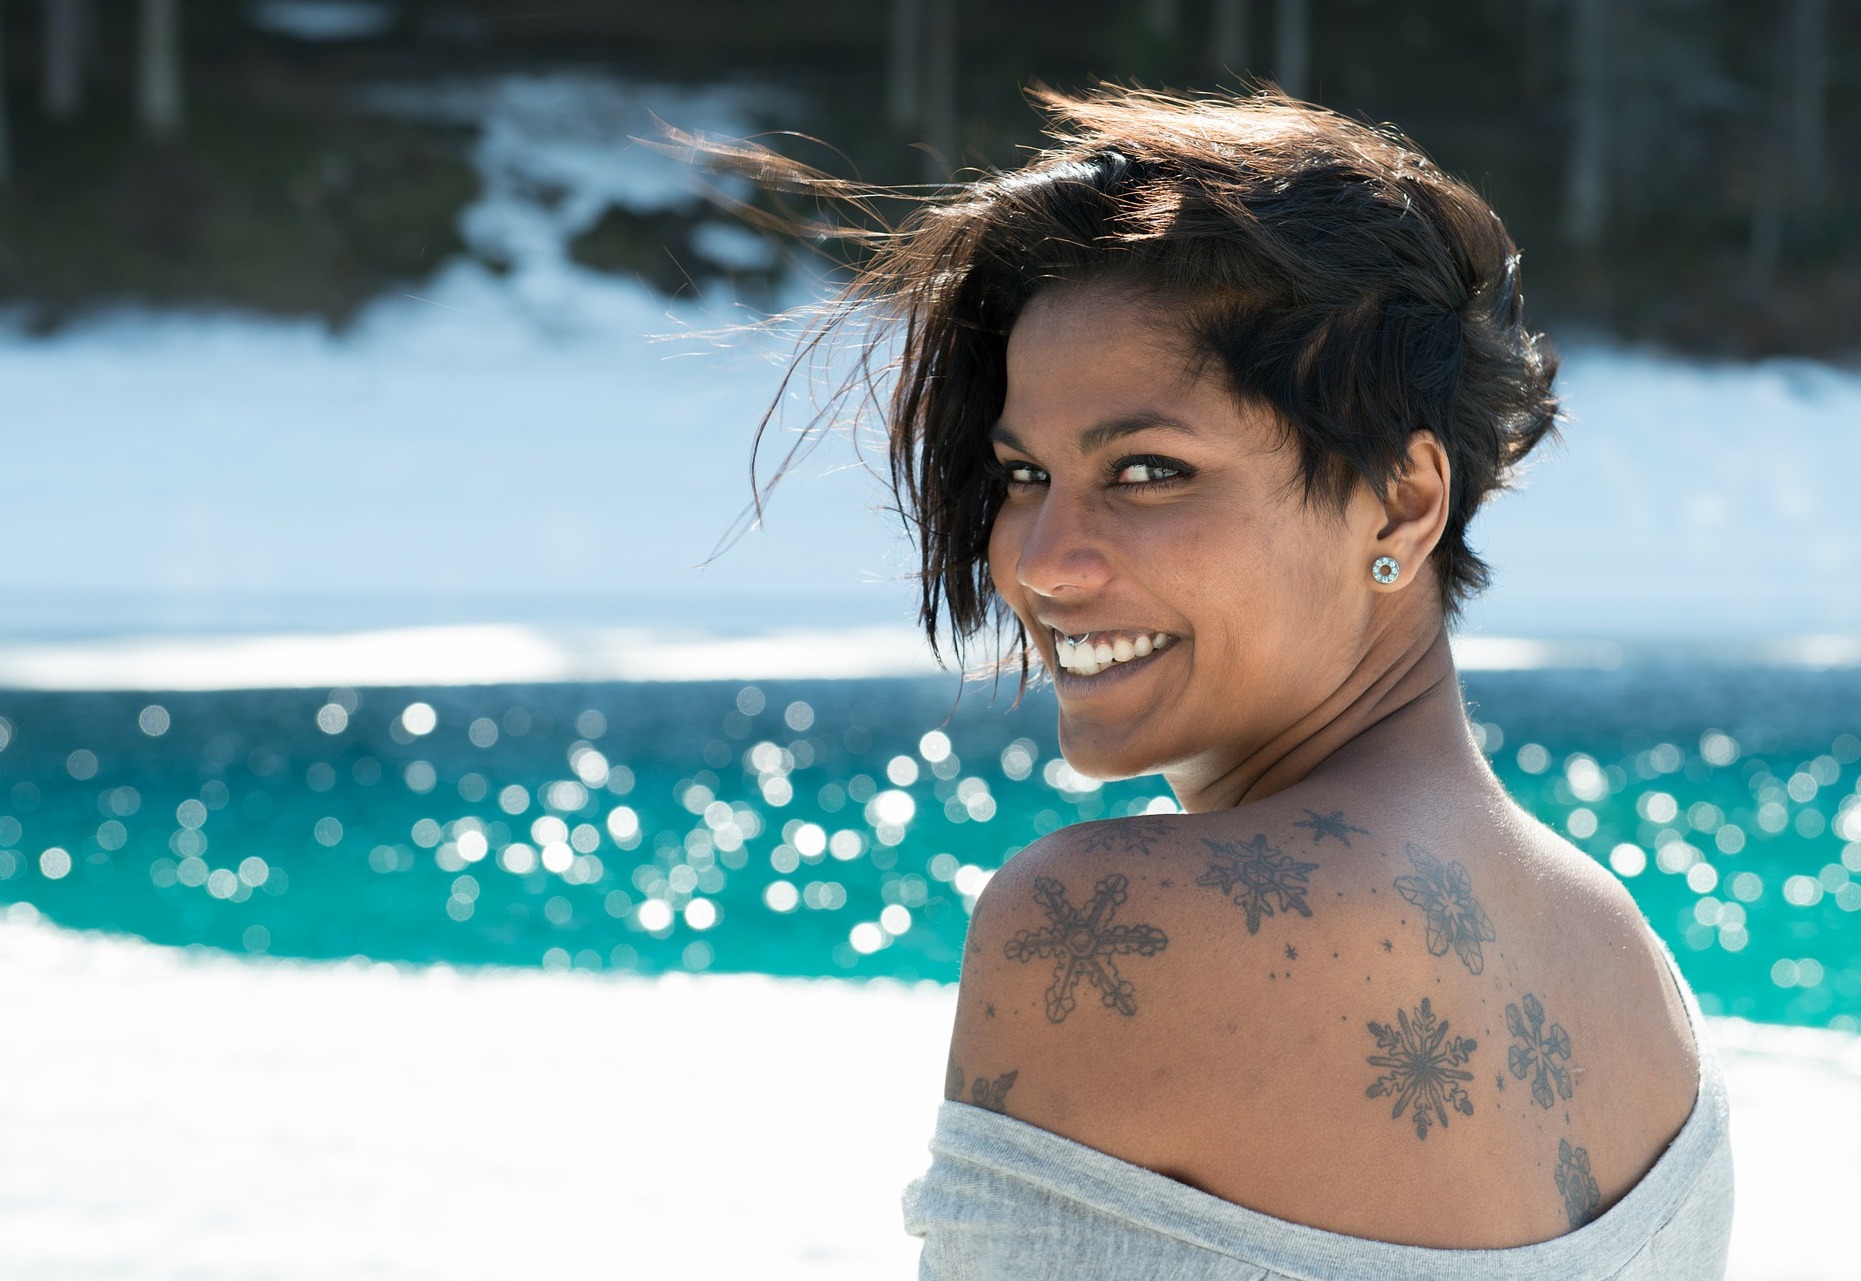 Woman with tattoos looking over her shoulder, smiling